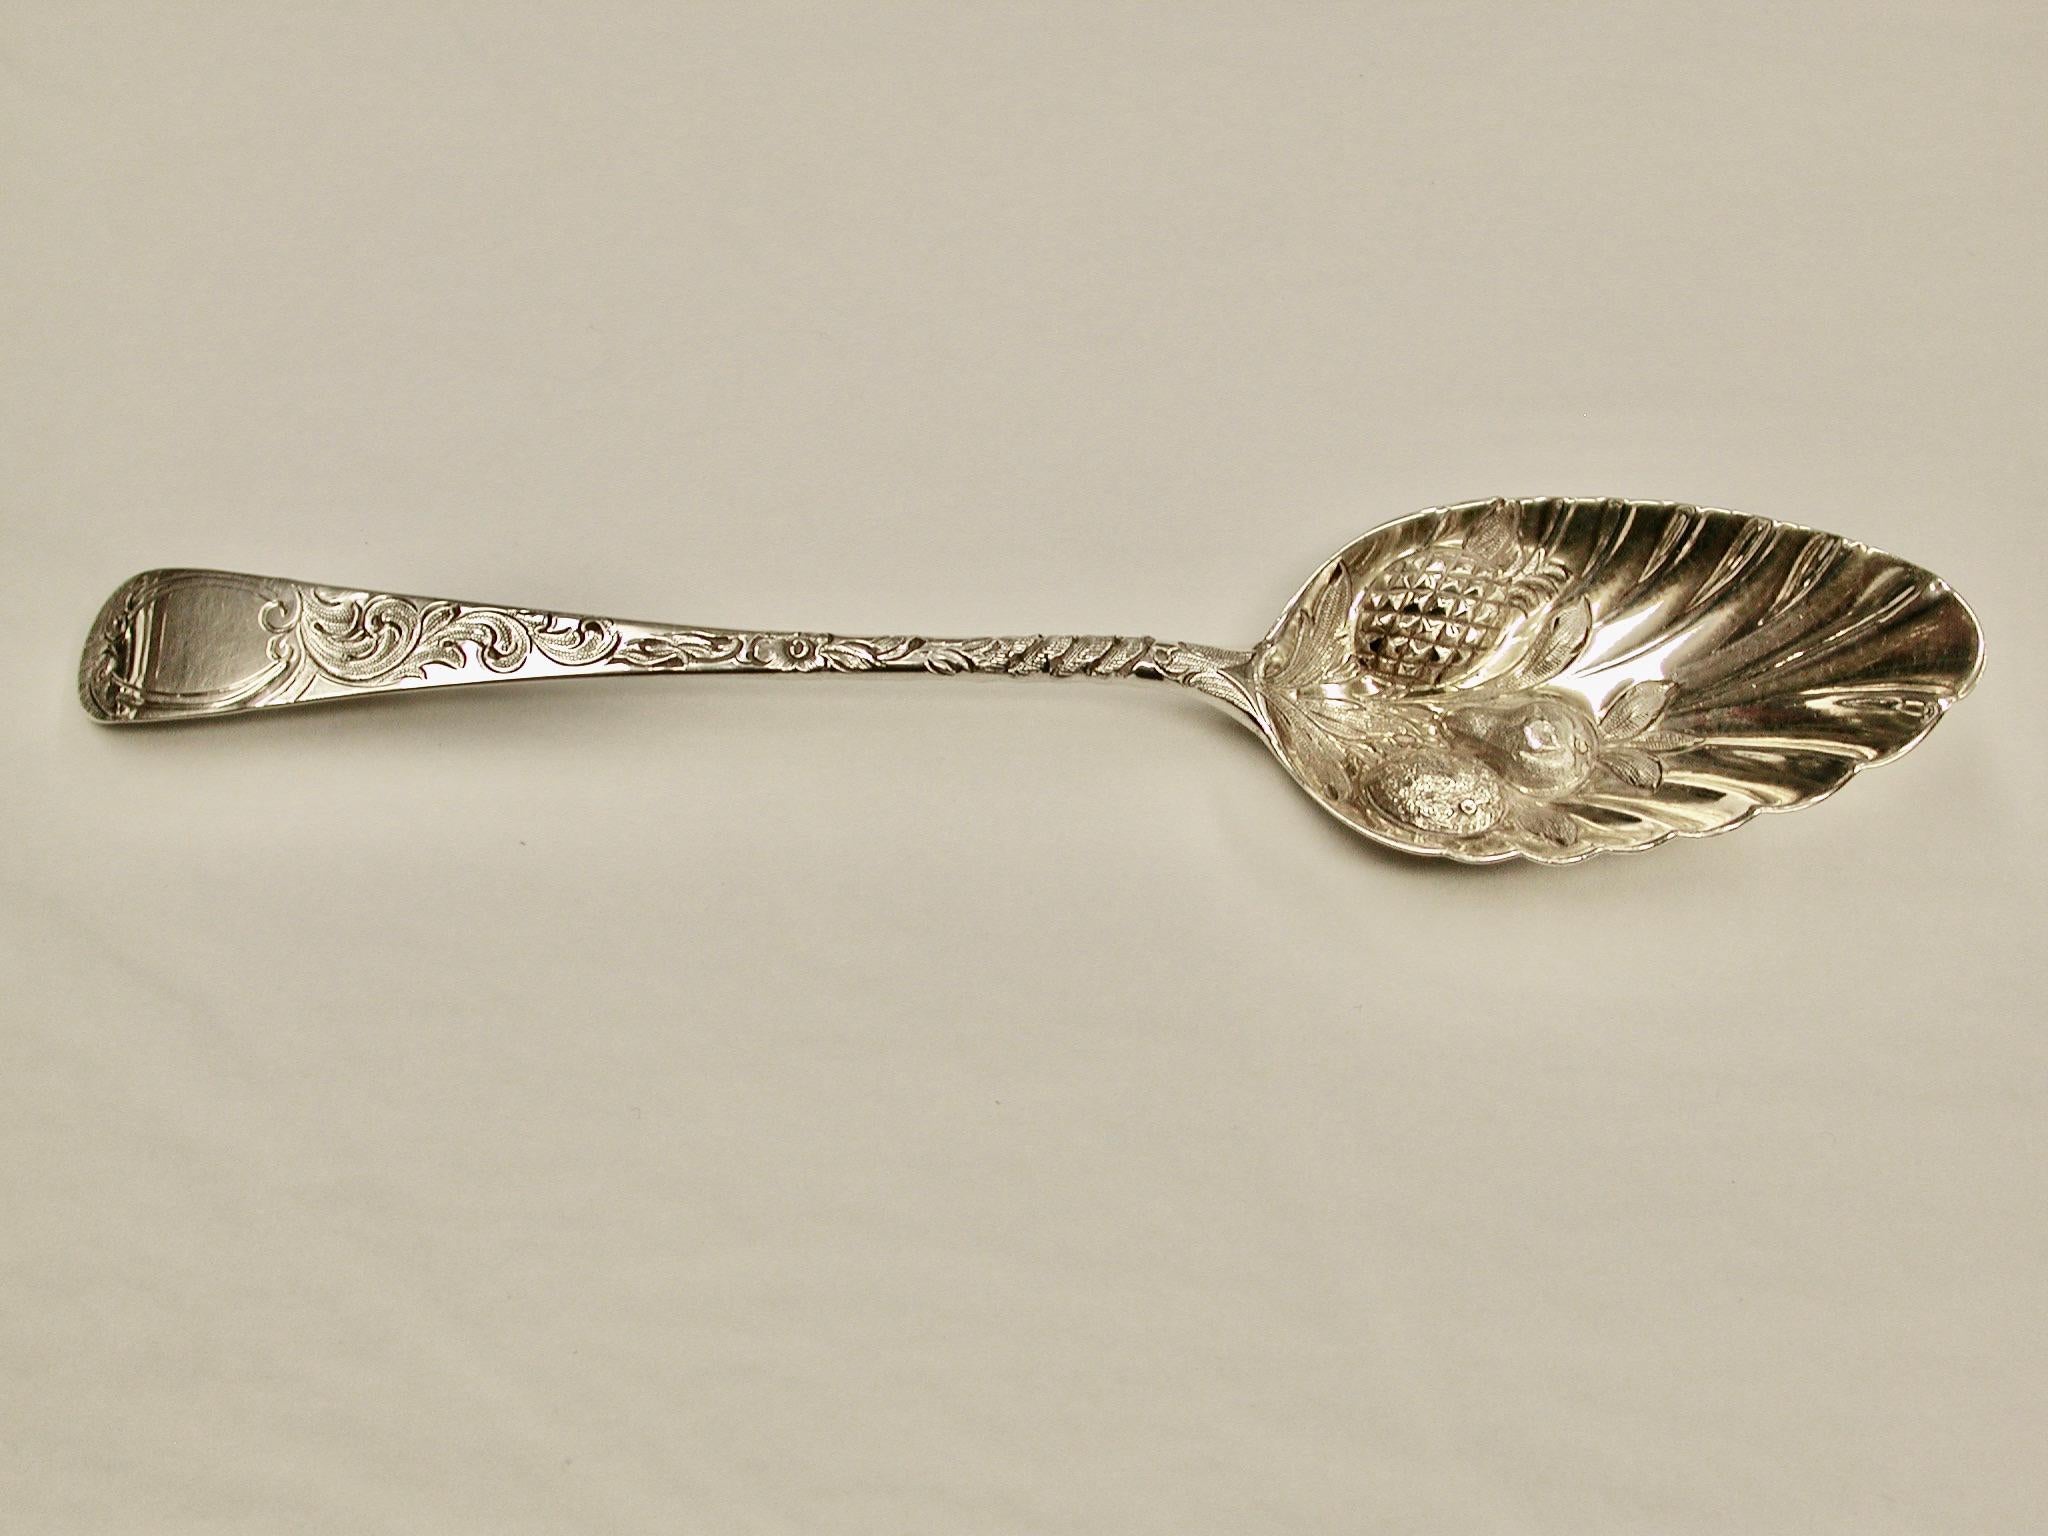 Pair of George 111 Silver Berry spoons Dated 1800, Richard Crossley, London Assay
Well made pair of hand chased berry spoons with pattern on both sides.